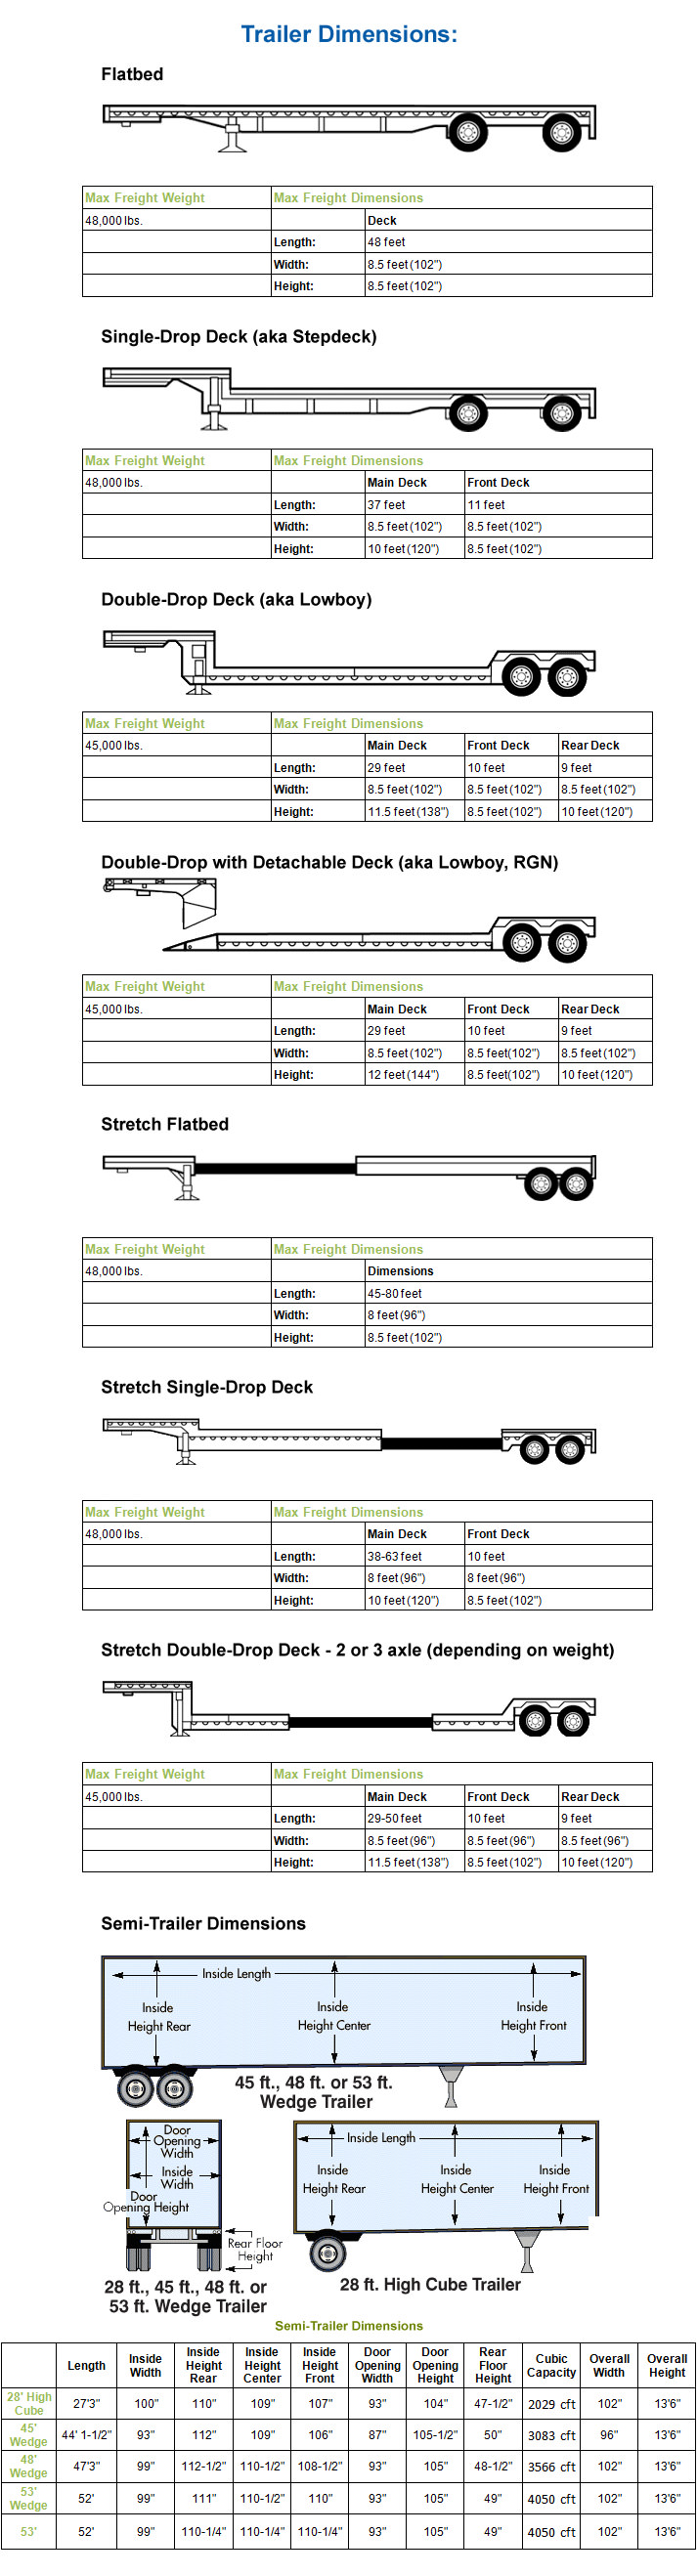 Van & Trailer Dimensions for Hauling Freight